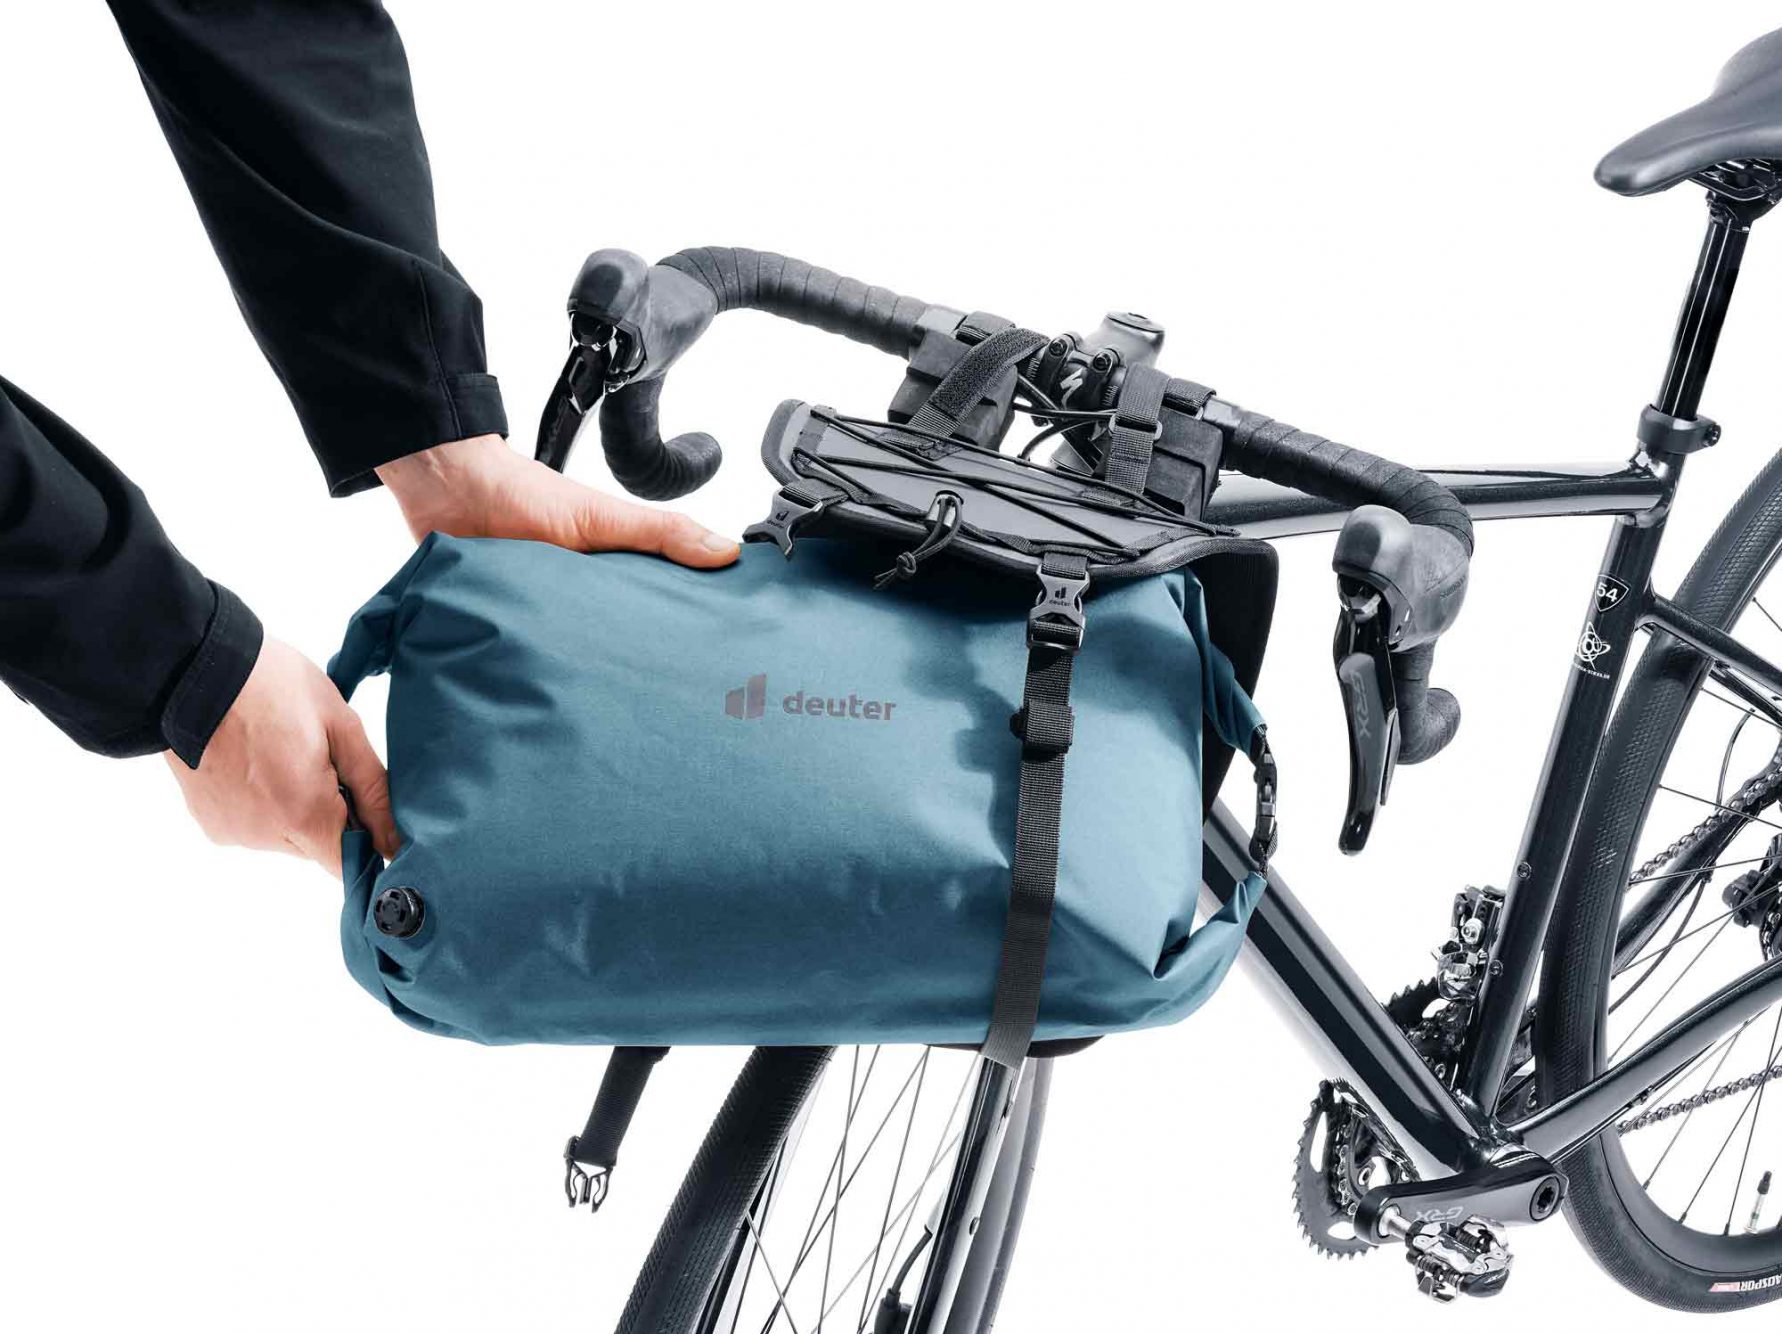 Practical: the two-part construction. So you can quickly and easily remove the pannier without dismantling the actual holder from the handlebar.